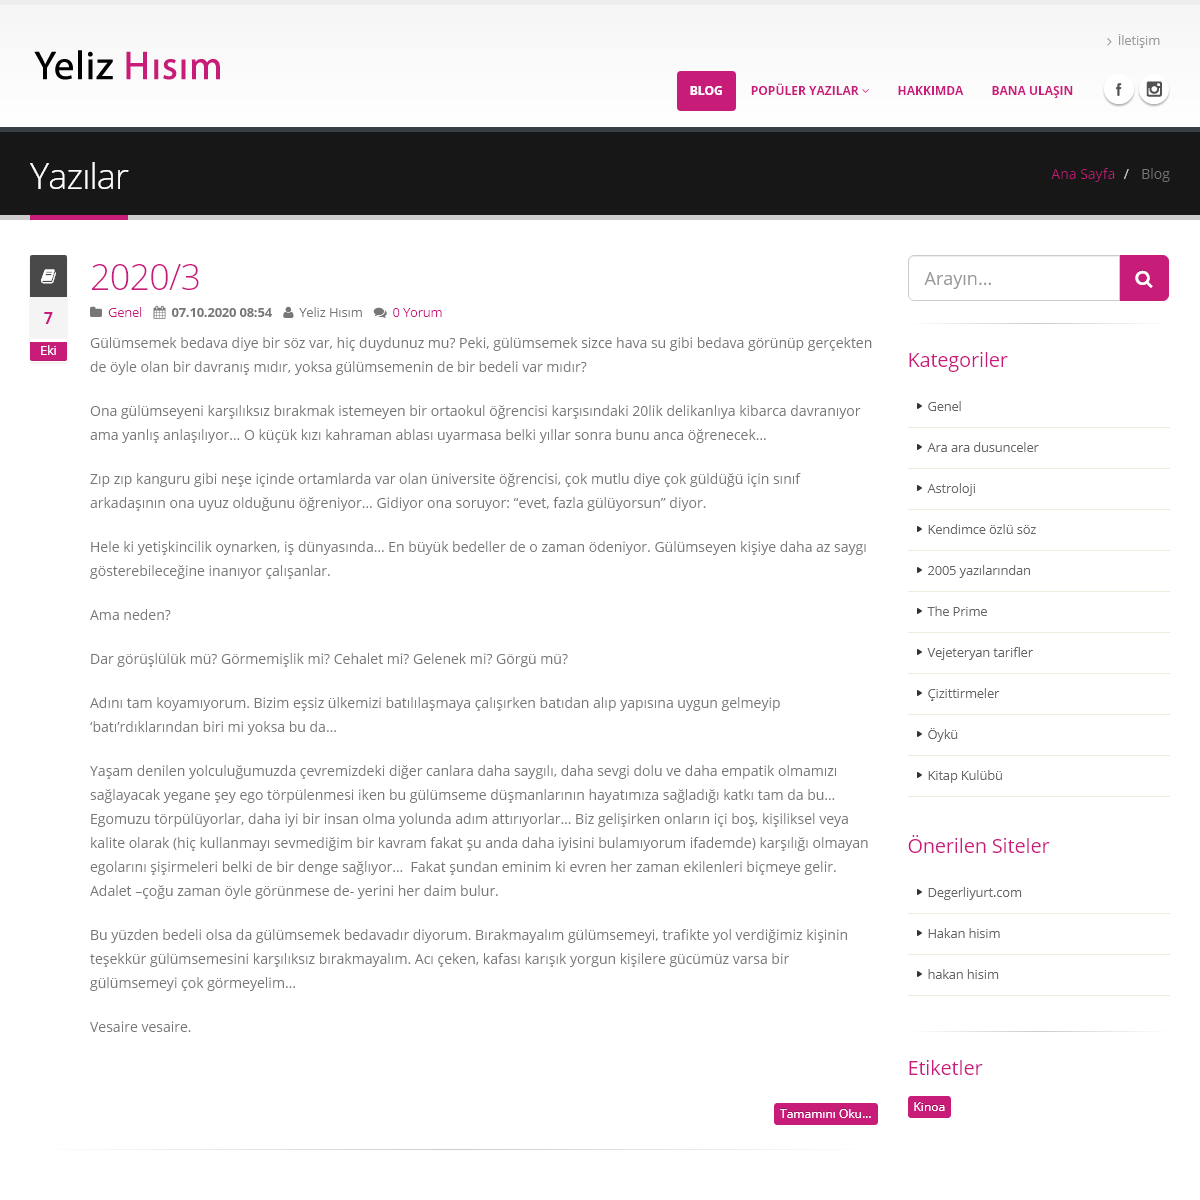 A complete backup of yelizhisim.com